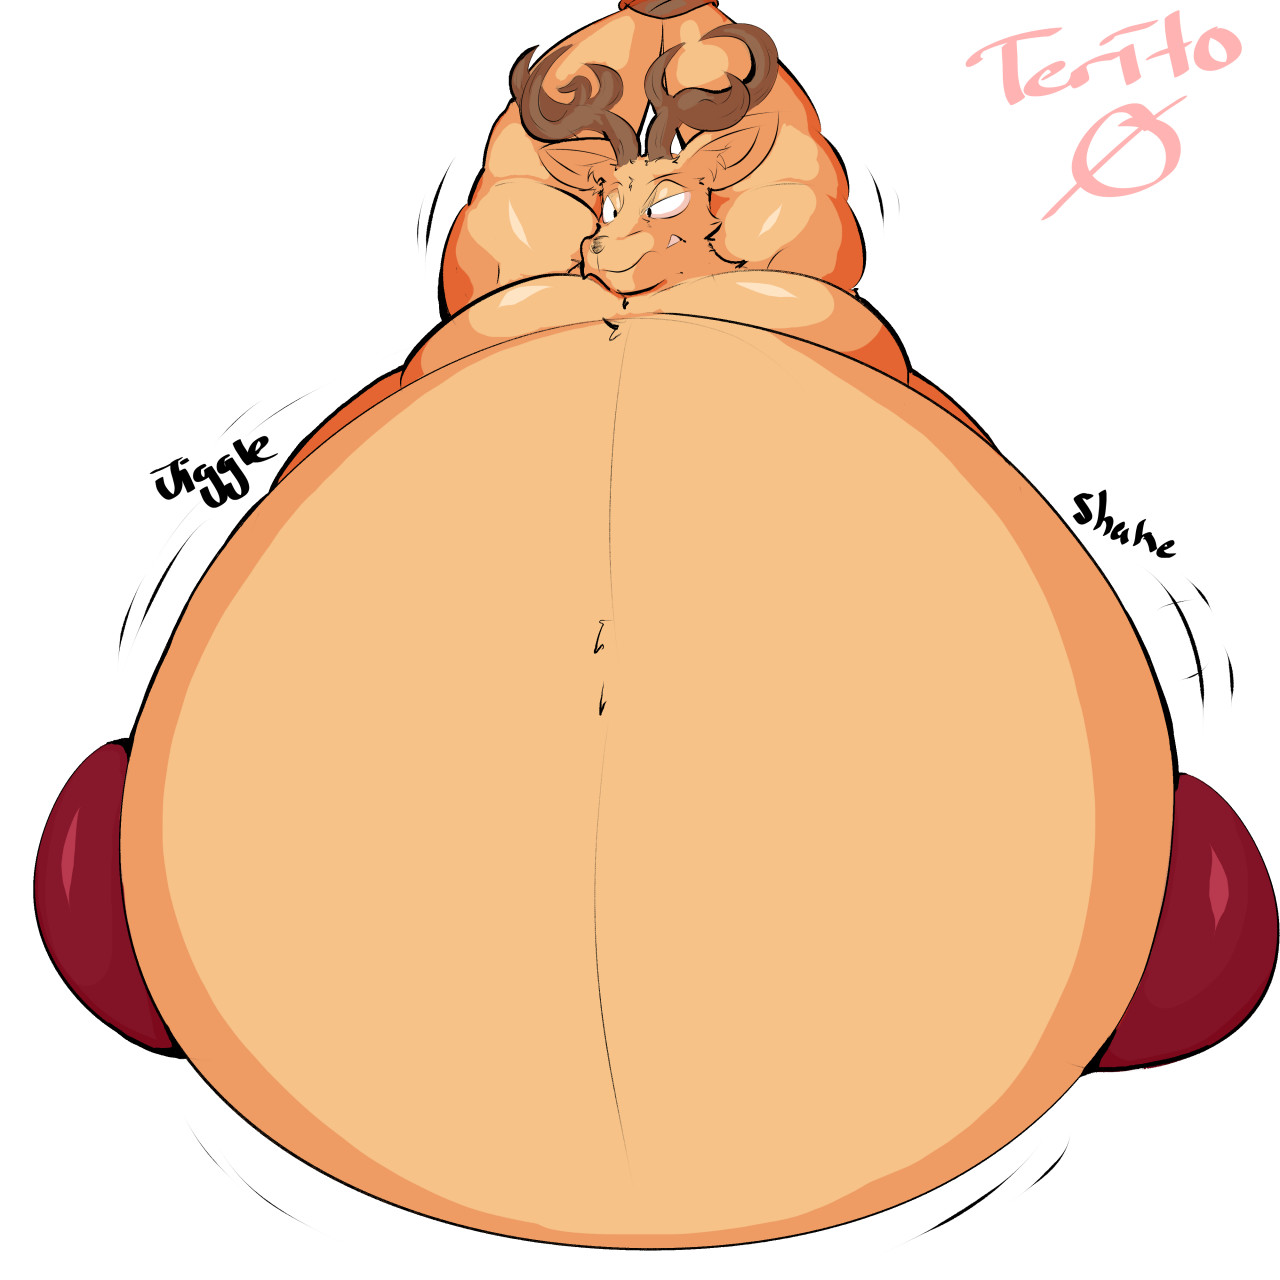 Belly inflation stuffing